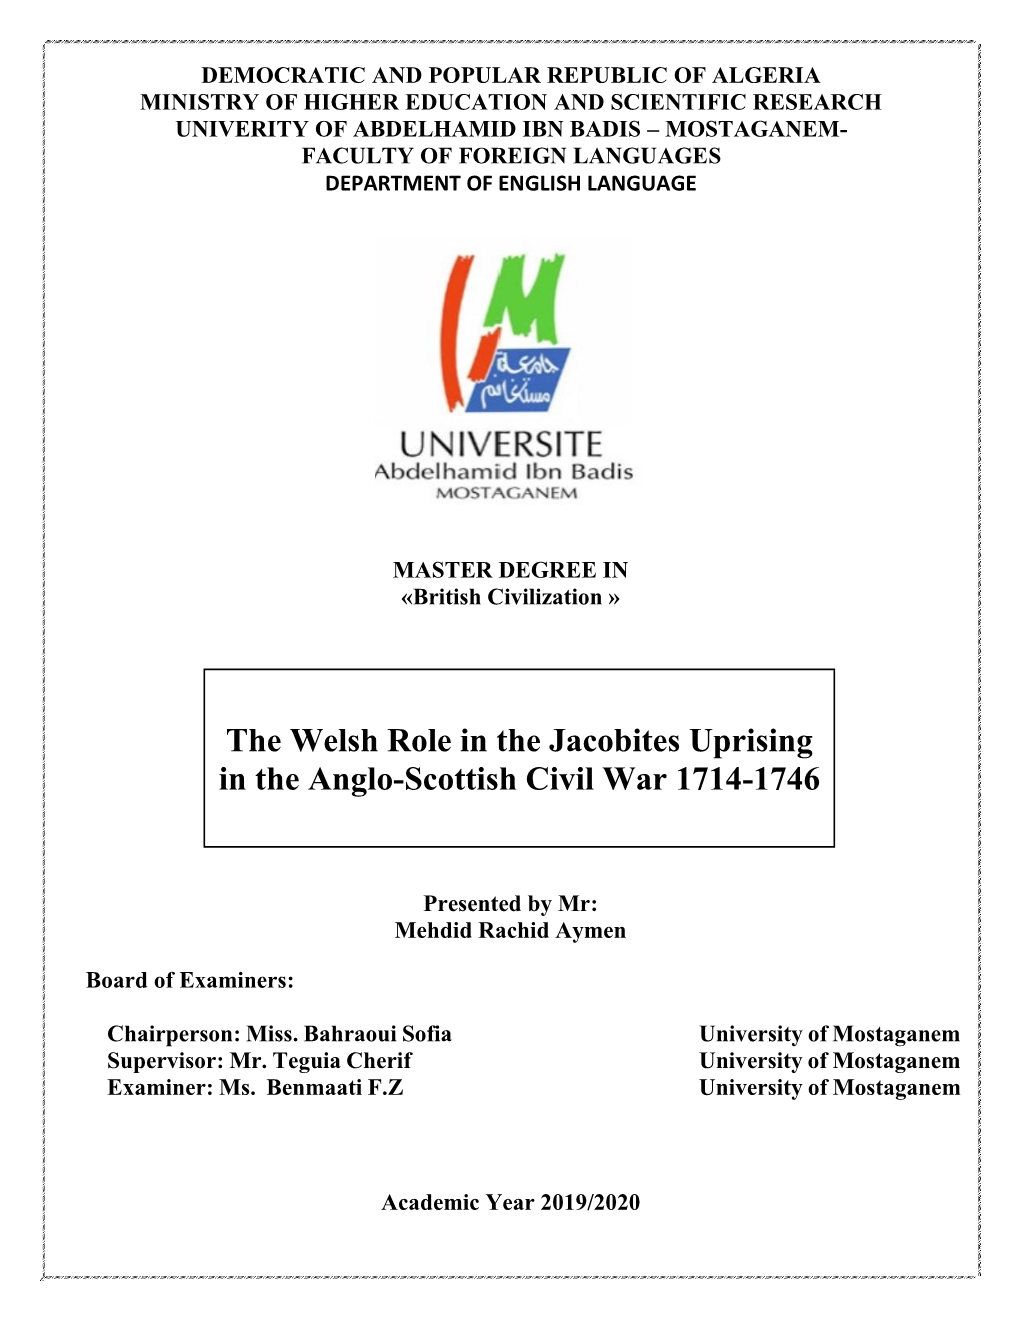 The Welsh Role in the Jacobites Uprising in the Anglo-Scottish Civil War 1714-1746